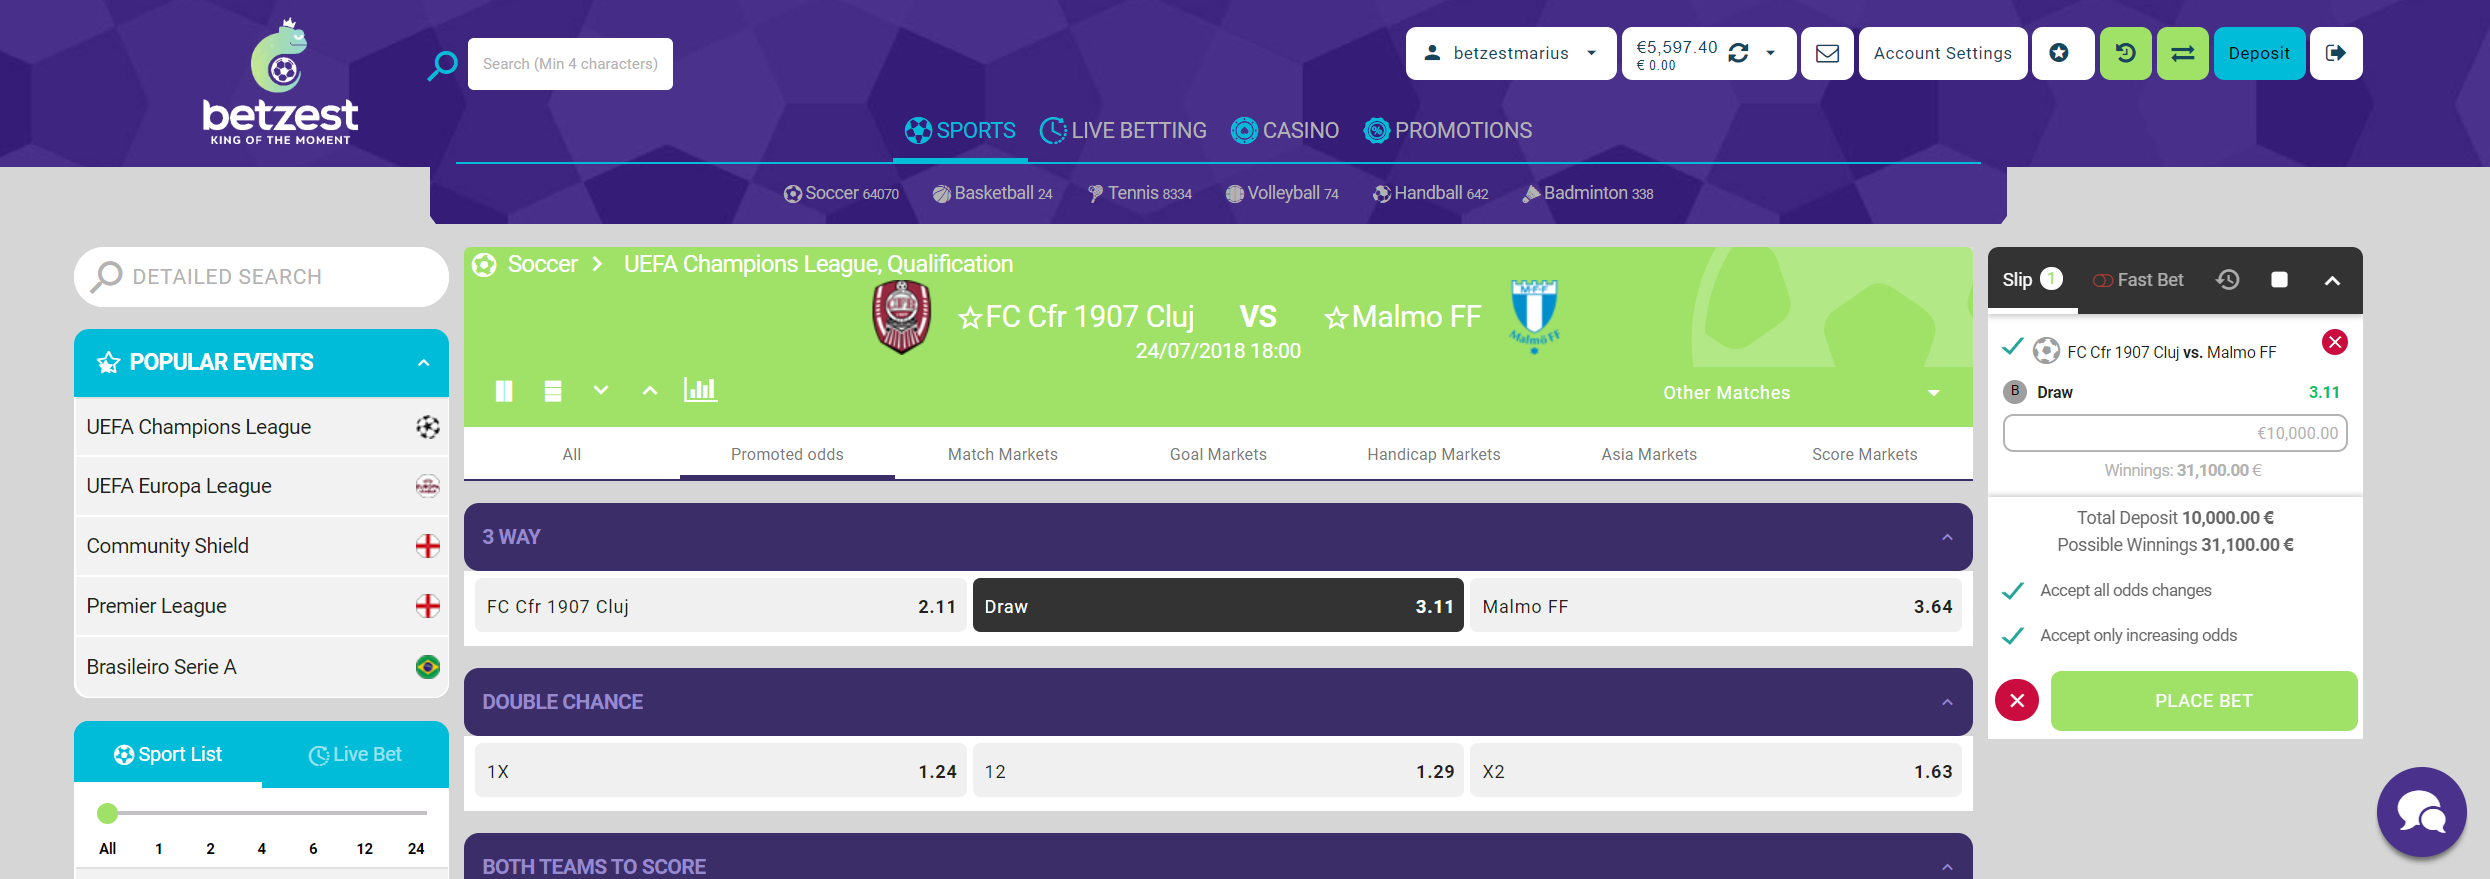 Bet on CFR Cluj vs Malmo. Betzest™ Get $/€5 no deposit, No wagering